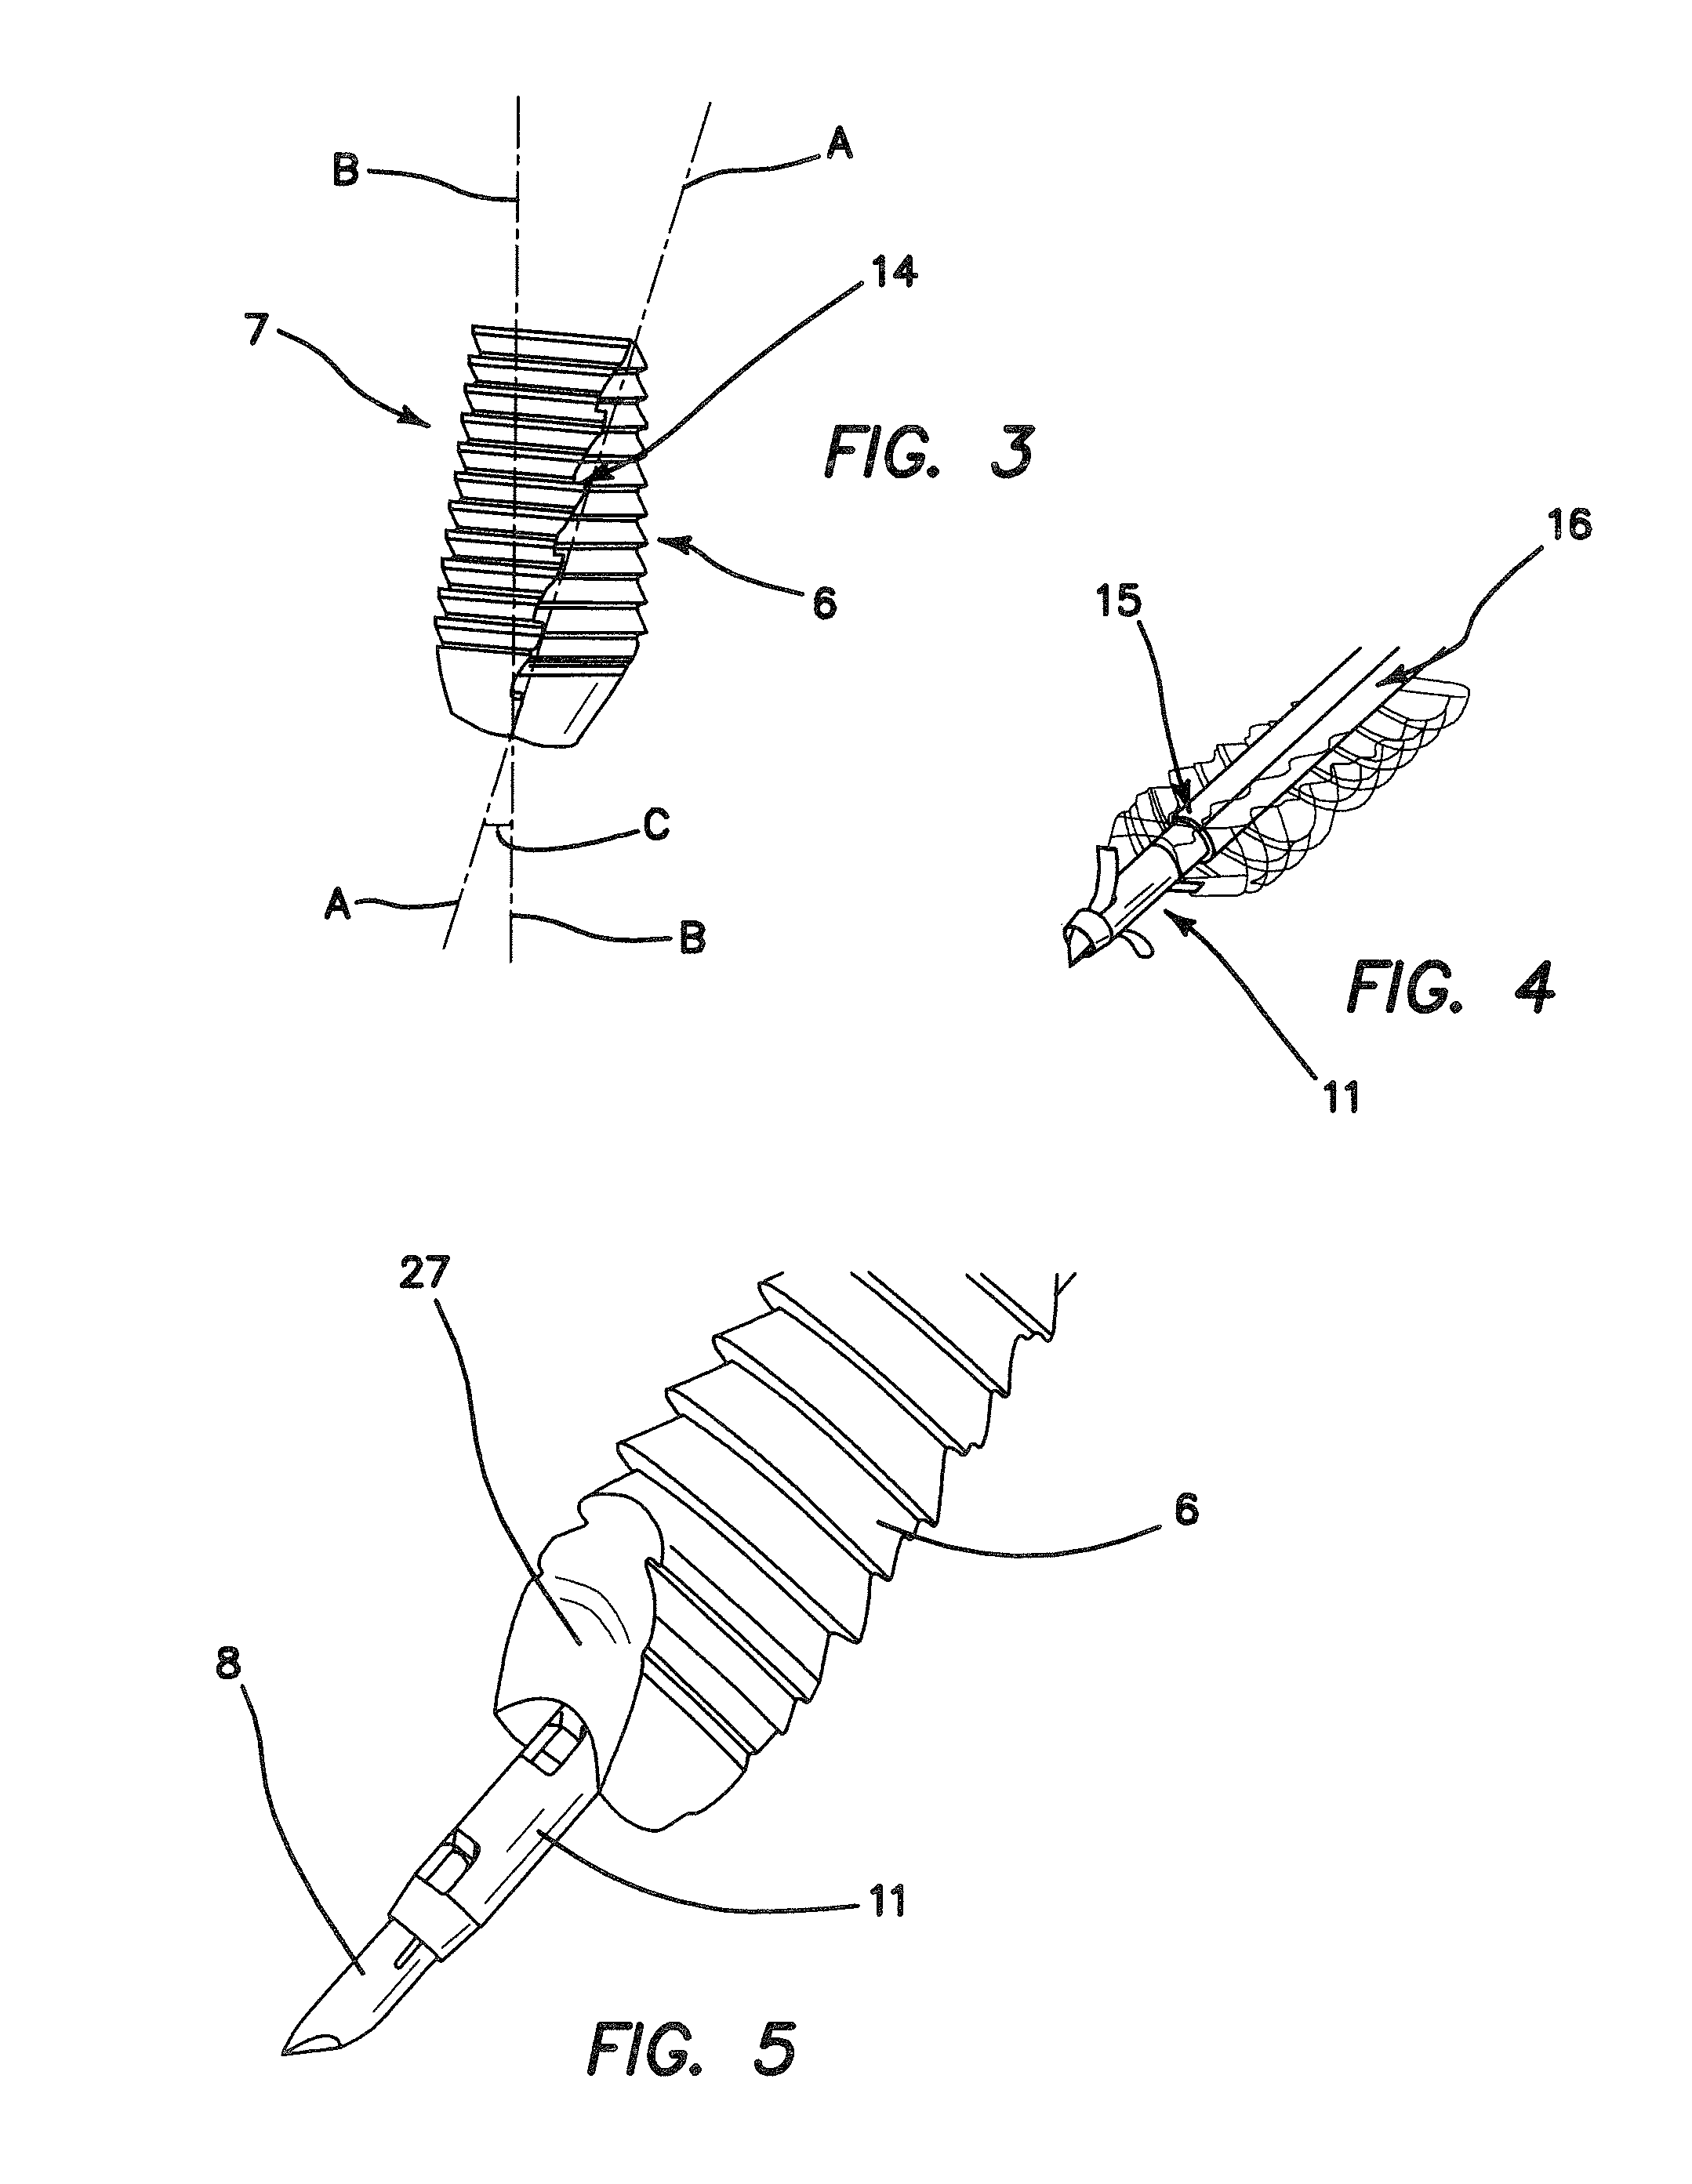 Tenodesis implant and inserter and methods for using same